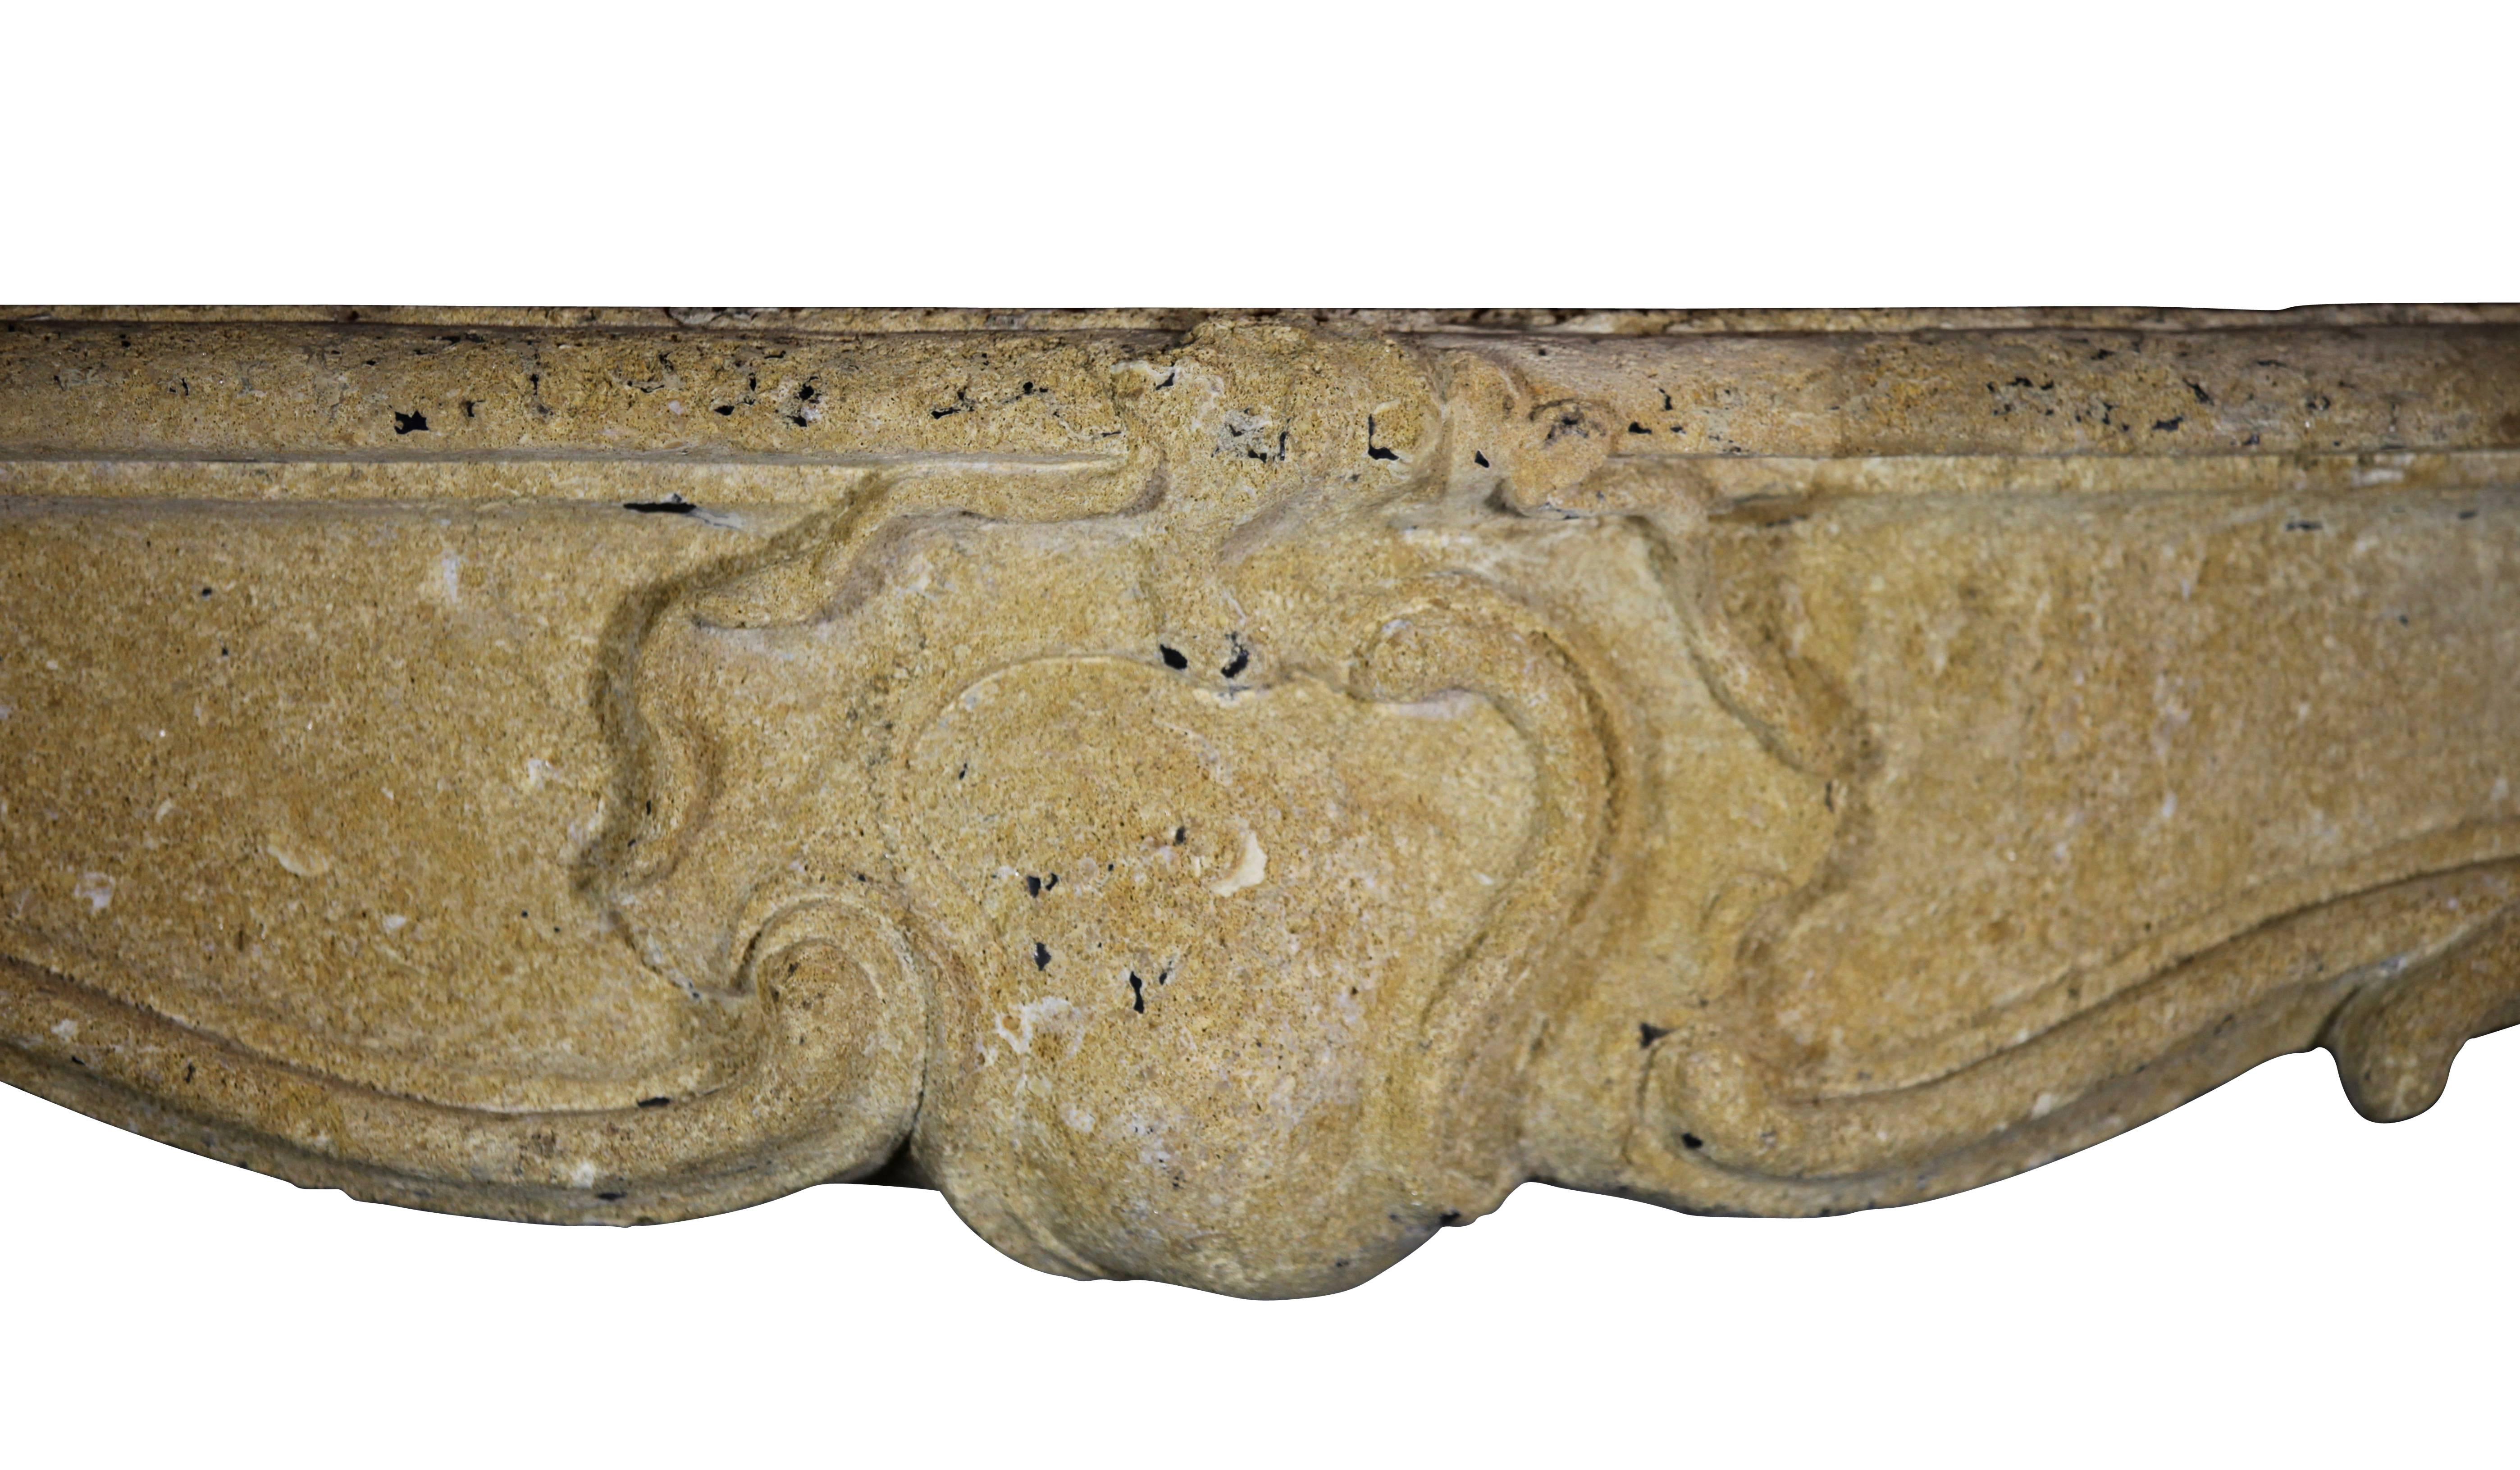 A museum quality petite original antique fireplace surround in Pierre d'or from the region of Rome with amazing remains of the original patina.
Measures:
138 cm EW 54.33".
103 cm EH 40.55".
102 cm IW 40.15".
83 cm IH